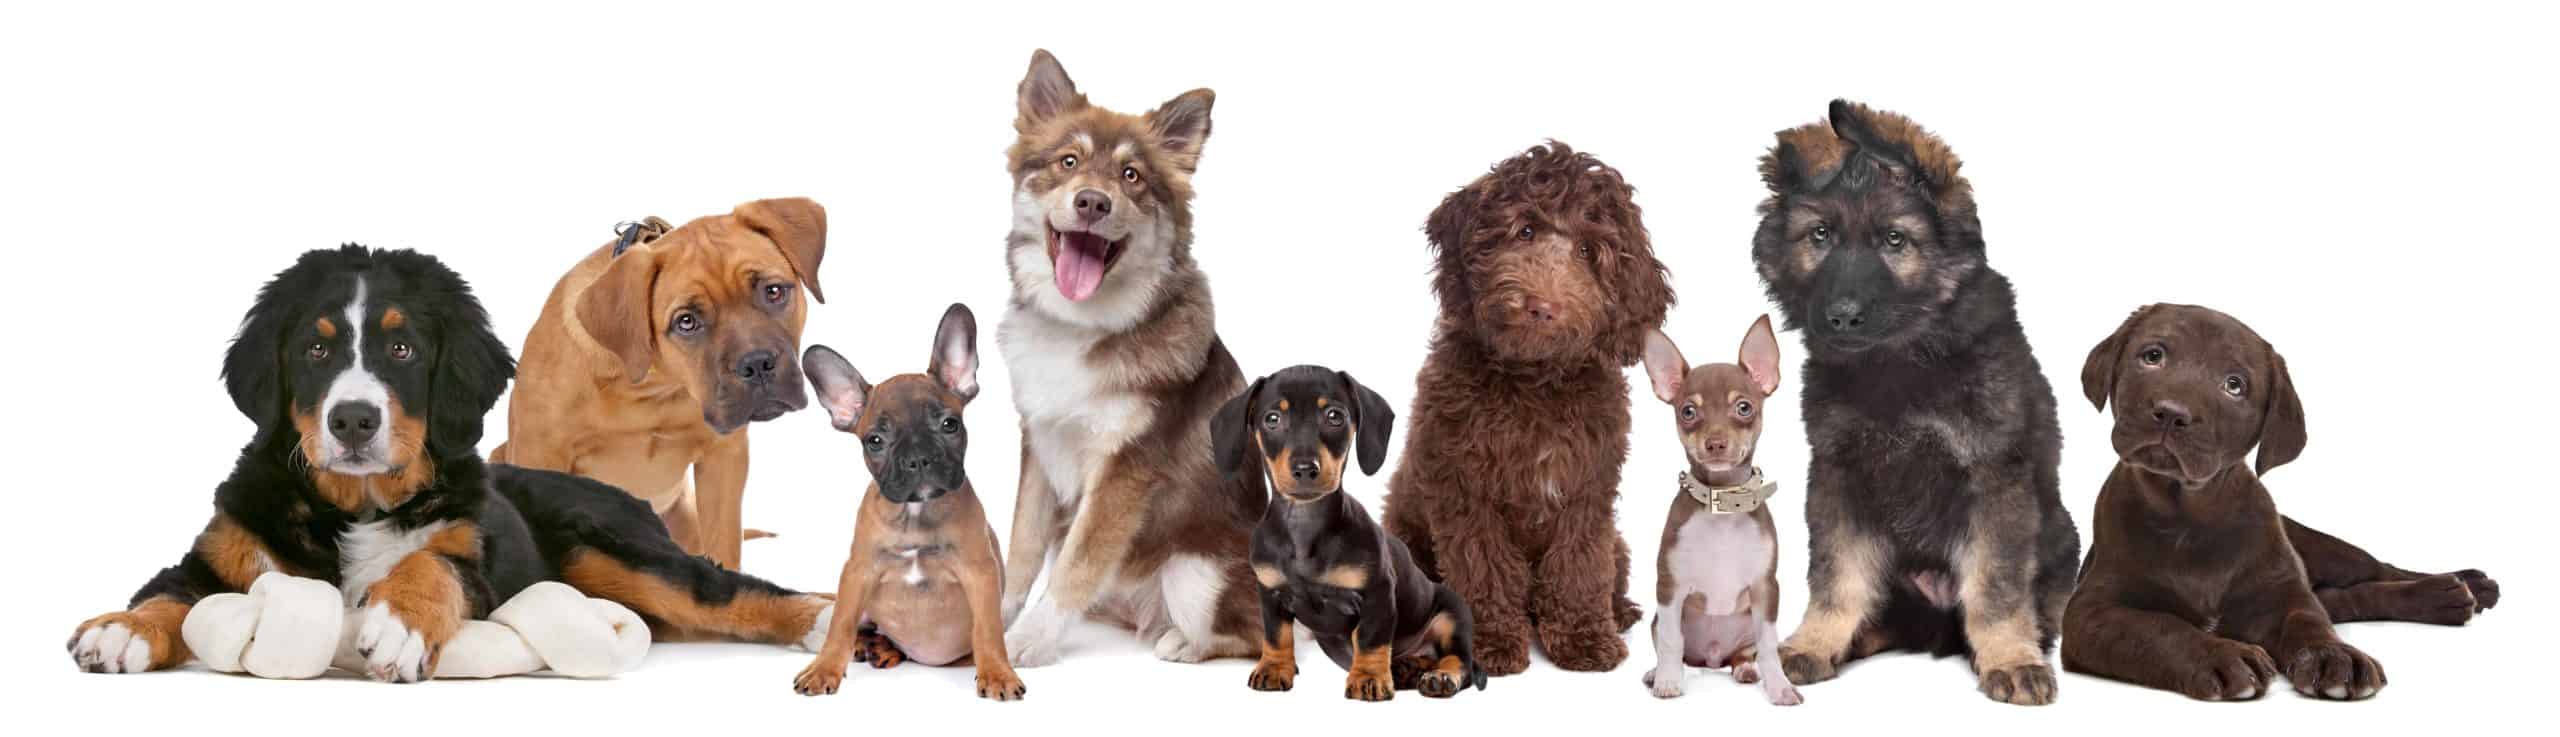 Collection of adorable puppies including Bernese Mountain Dog, Boxer, French Bulldog, Australian Shepherd, Dachshund, Labradoodle, Chihuahua, German Shepherd, Chocolate Labrador. When selecting a dog name for your puppy, choose between cute dog names, boy dog names, girl dog names, and the most popular dog names.